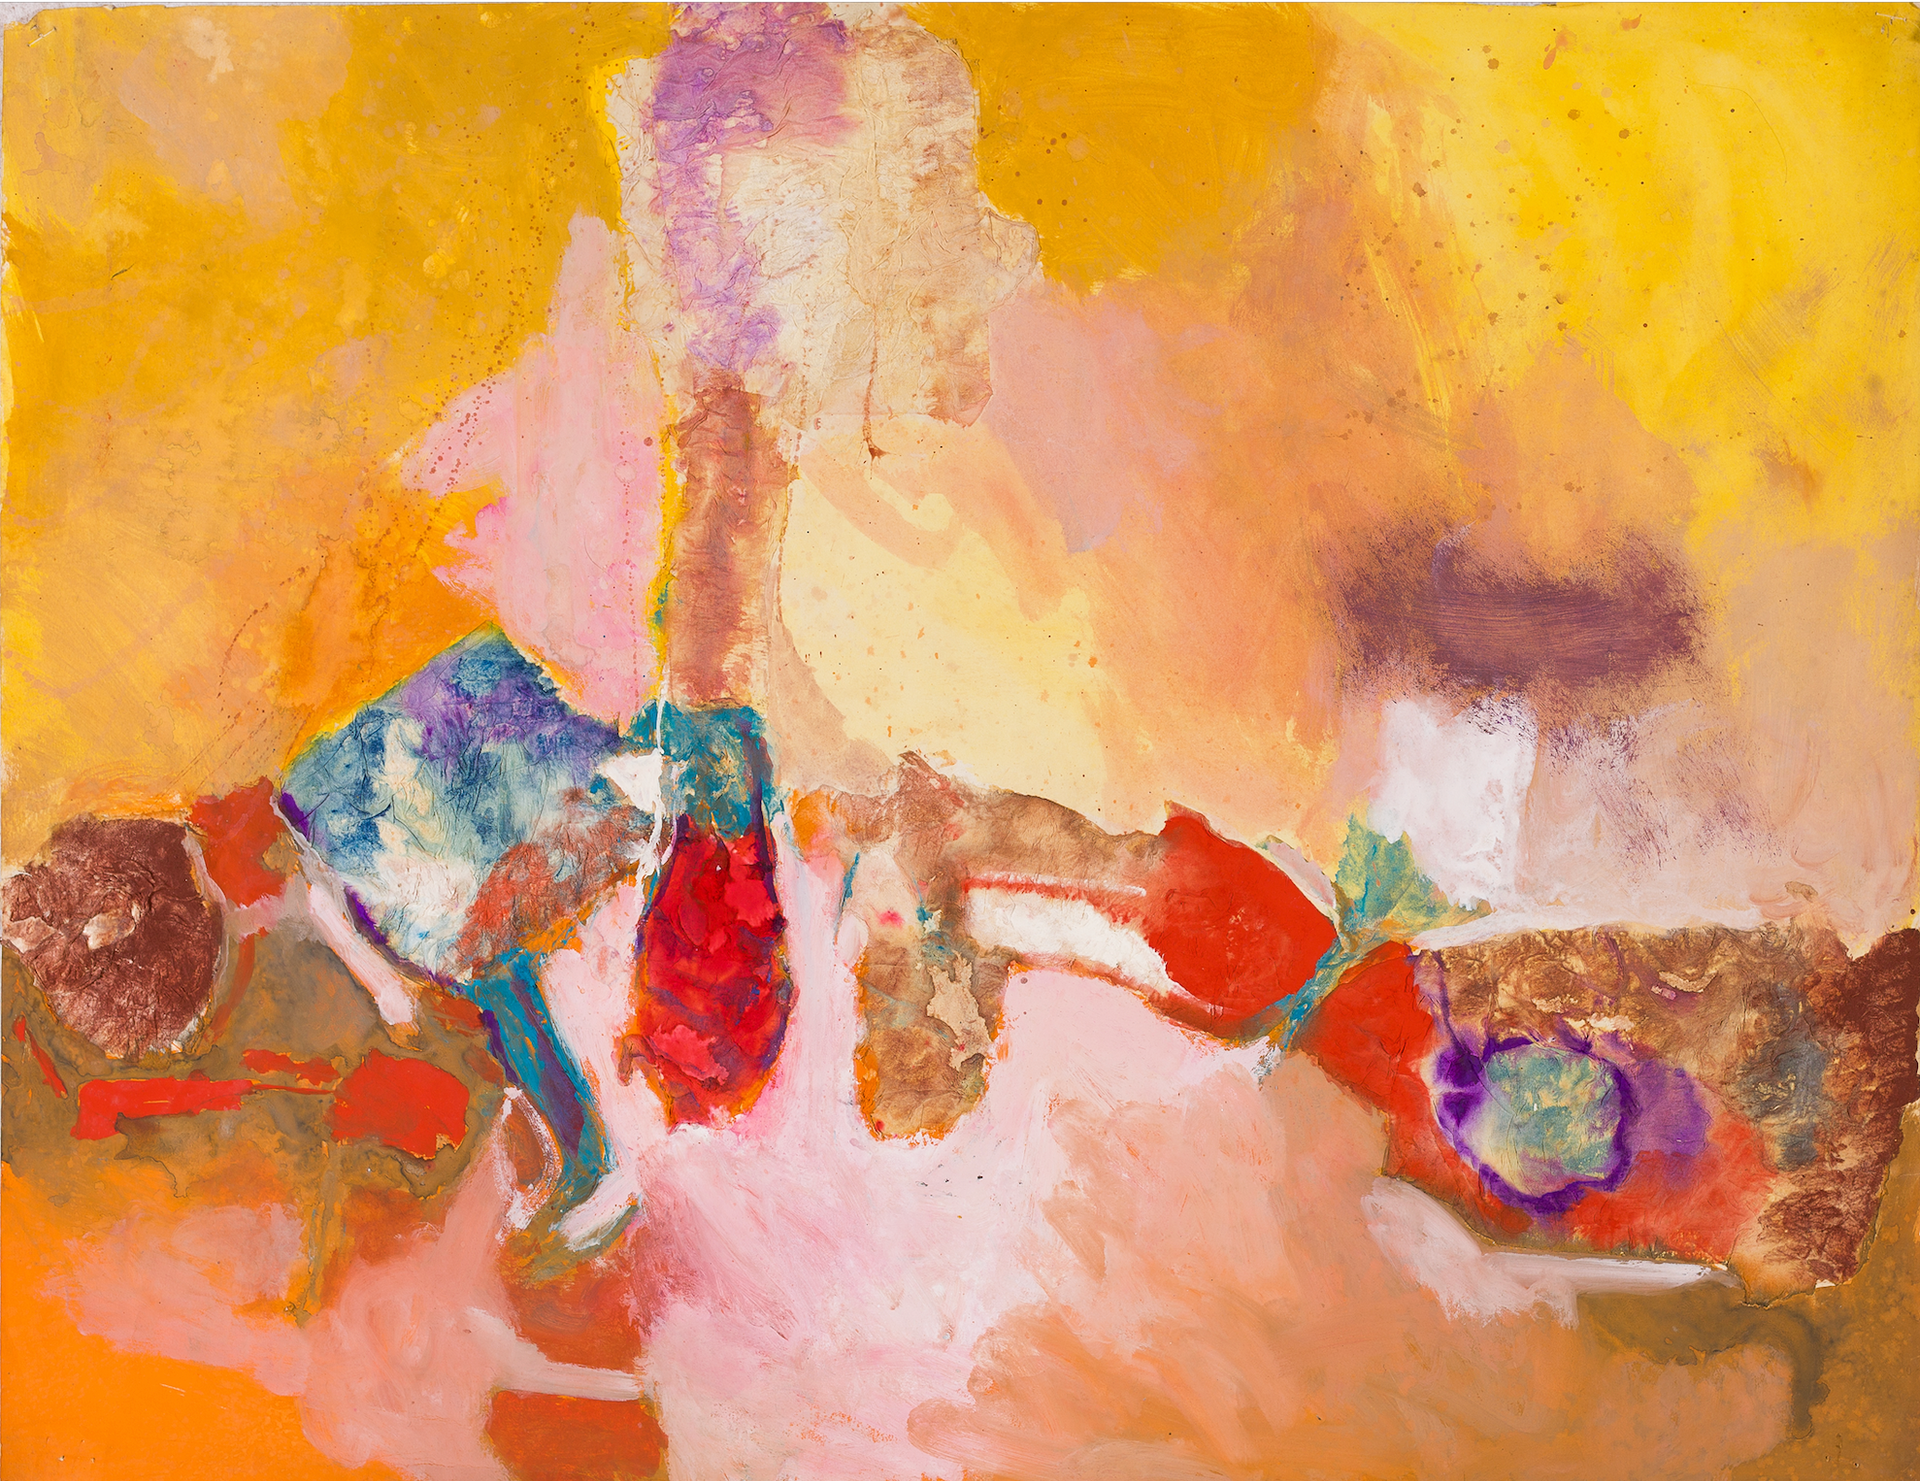 Abstract painting by Aubrey Williams with a bright yellow and orange background, with purple, blue, and red abstract shapes in the foreground.